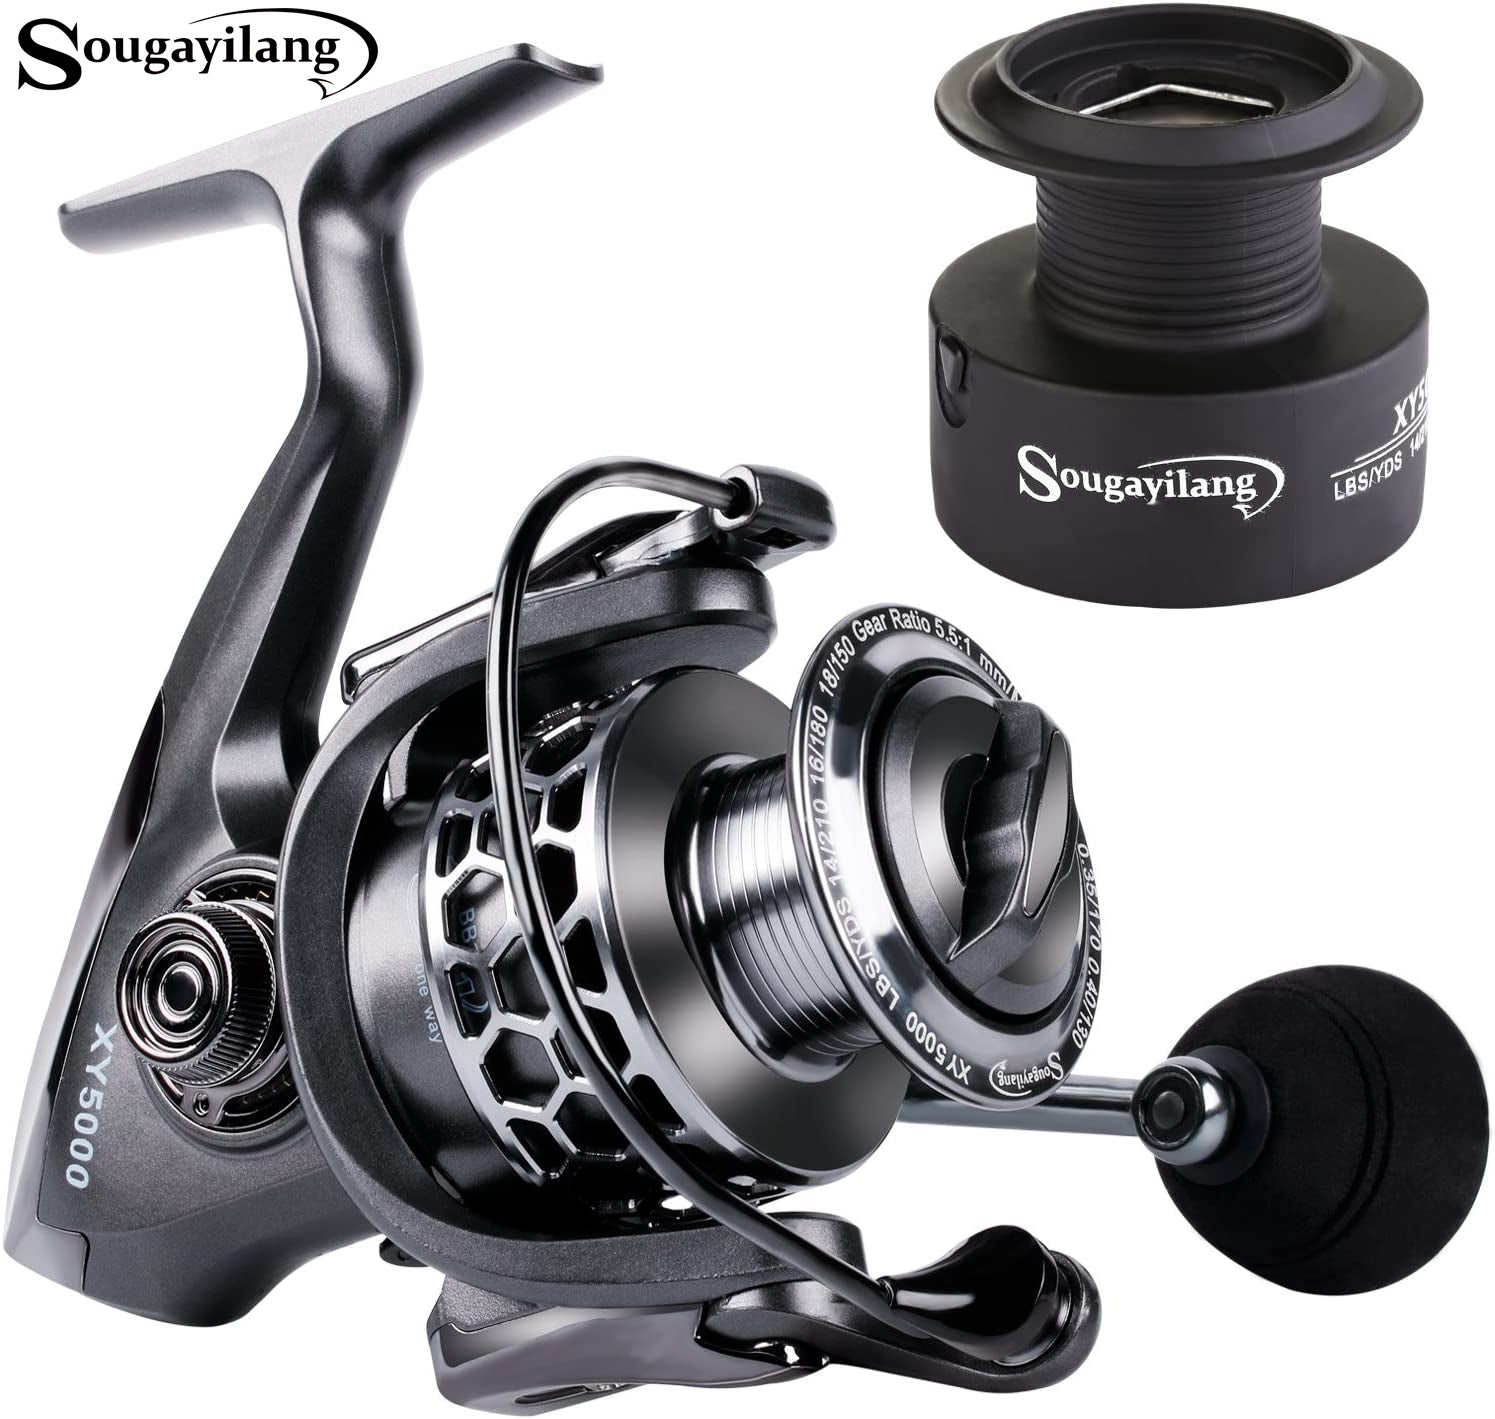 Sougayilang Spinning Reel 13+1 Stainless Steel Bb Bait Feeder Carp Fishing  Reel for Freshwater and Saltwater-6000, Spinning Reels -  Canada